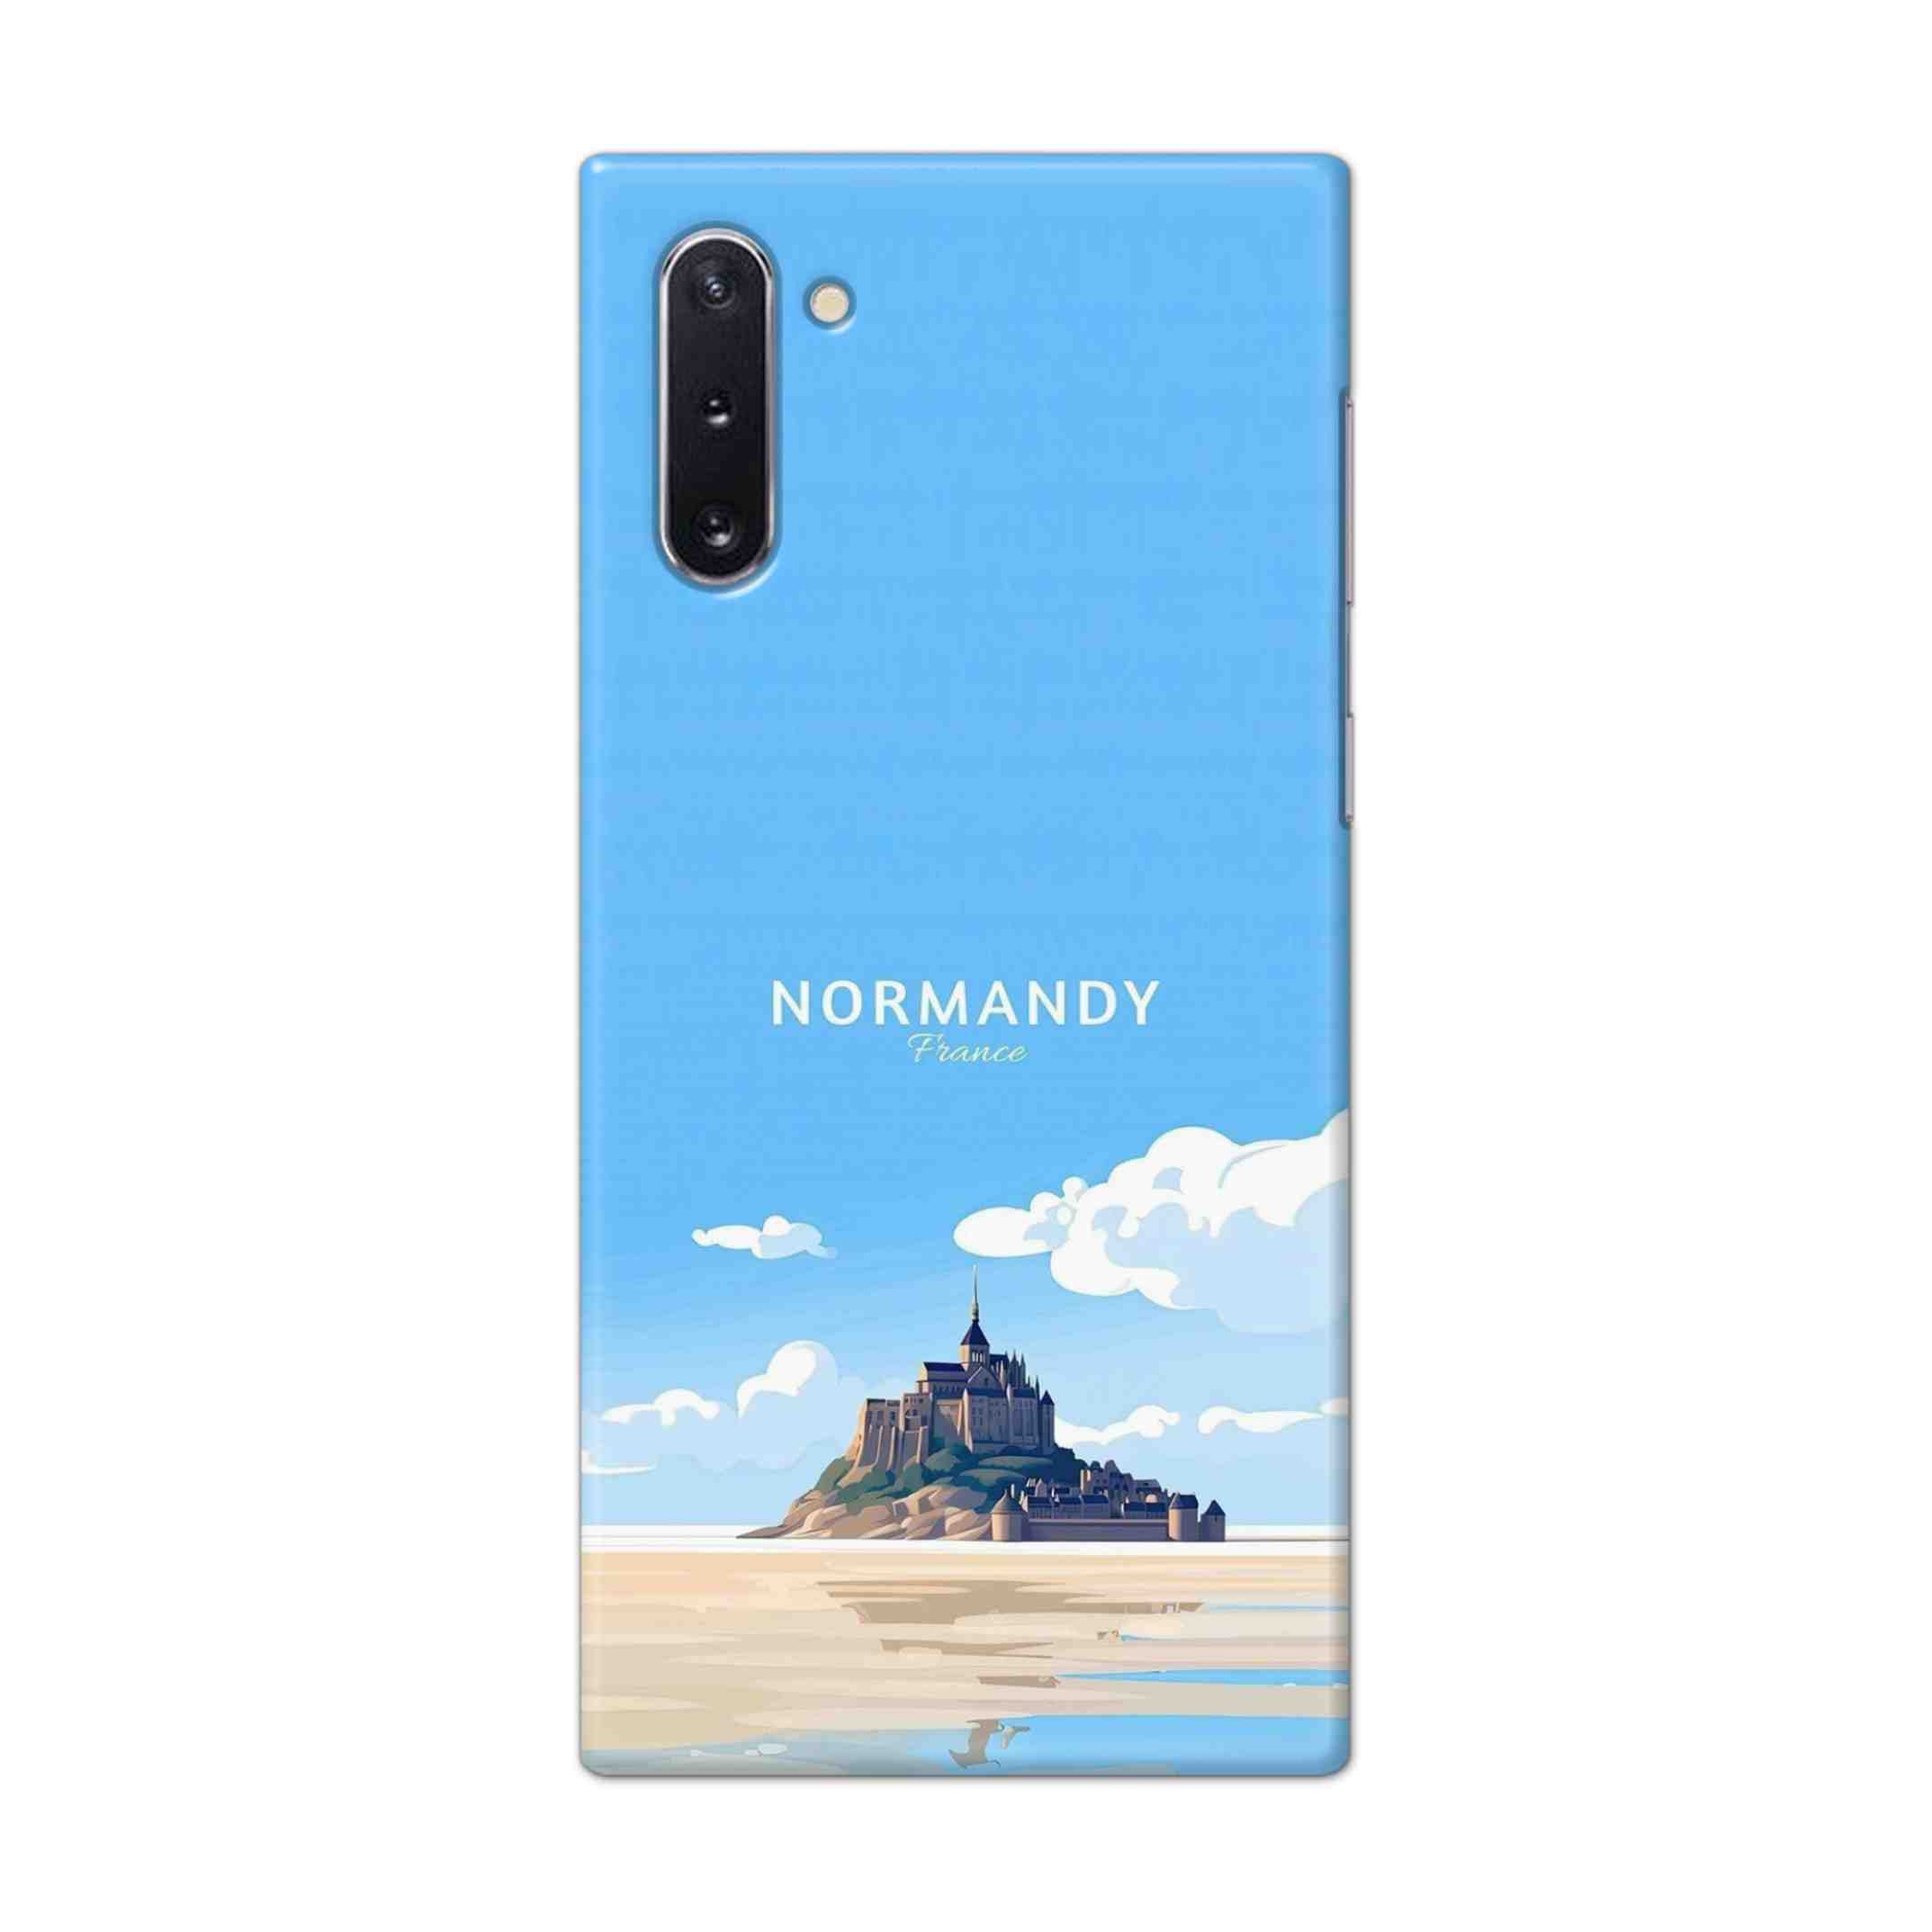 Buy Normandy Hard Back Mobile Phone Case Cover For Samsung Galaxy Note 10 Online